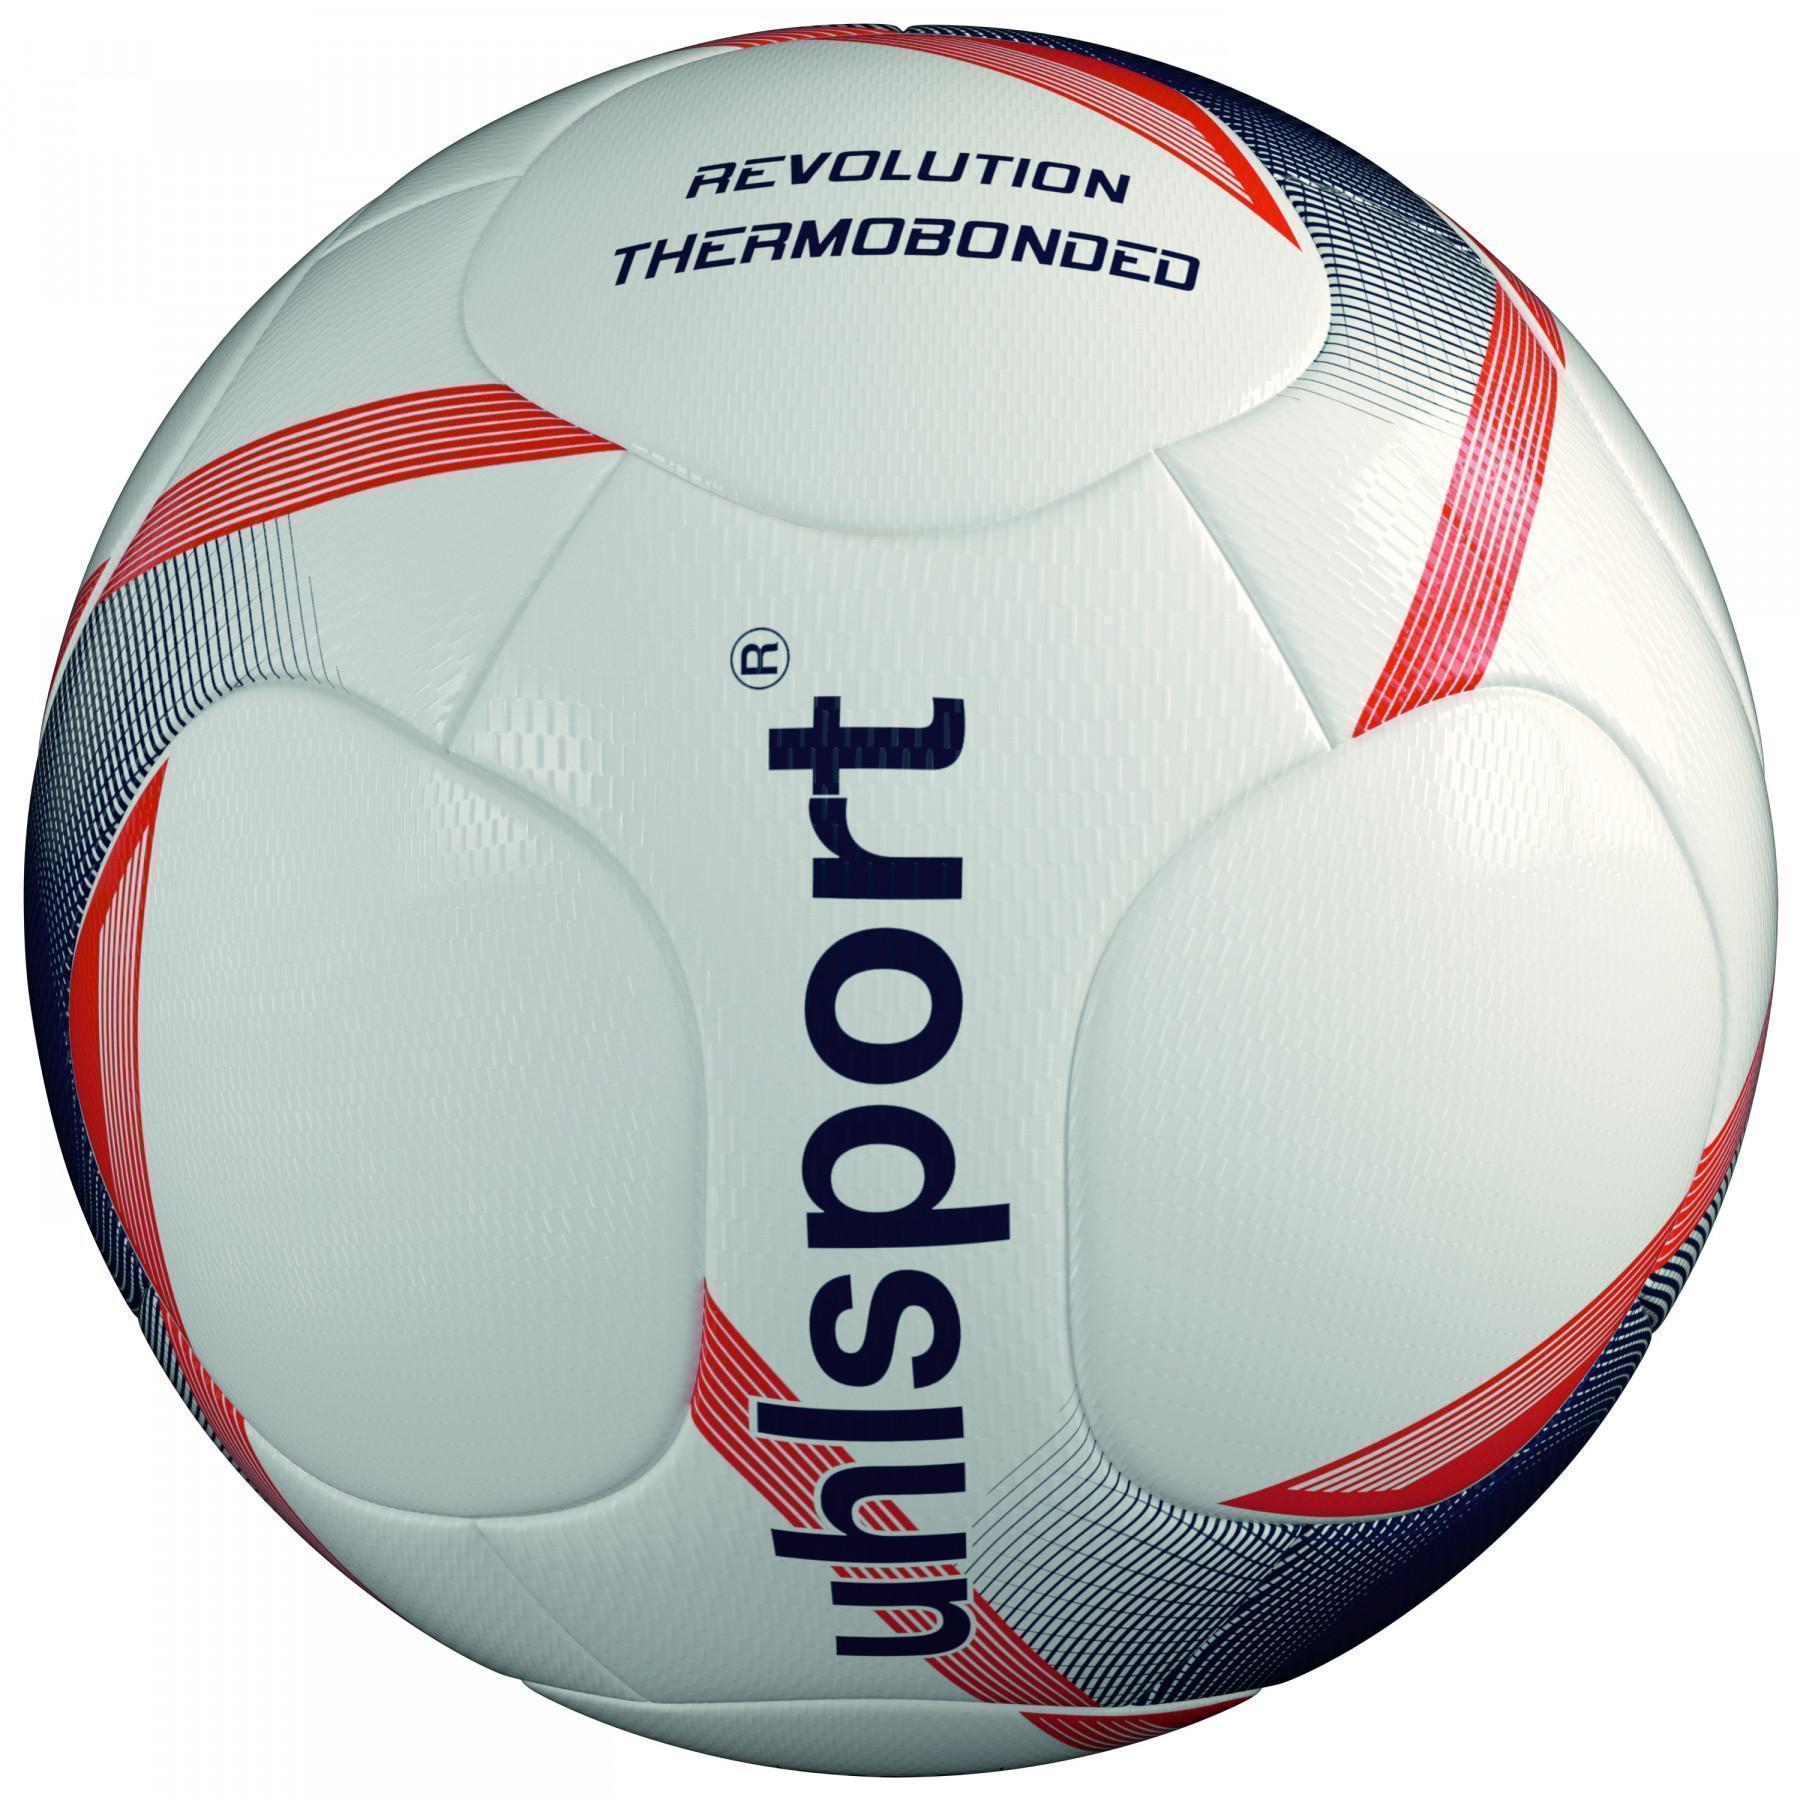 Palloncino Uhlsport Revolution Thermobonded